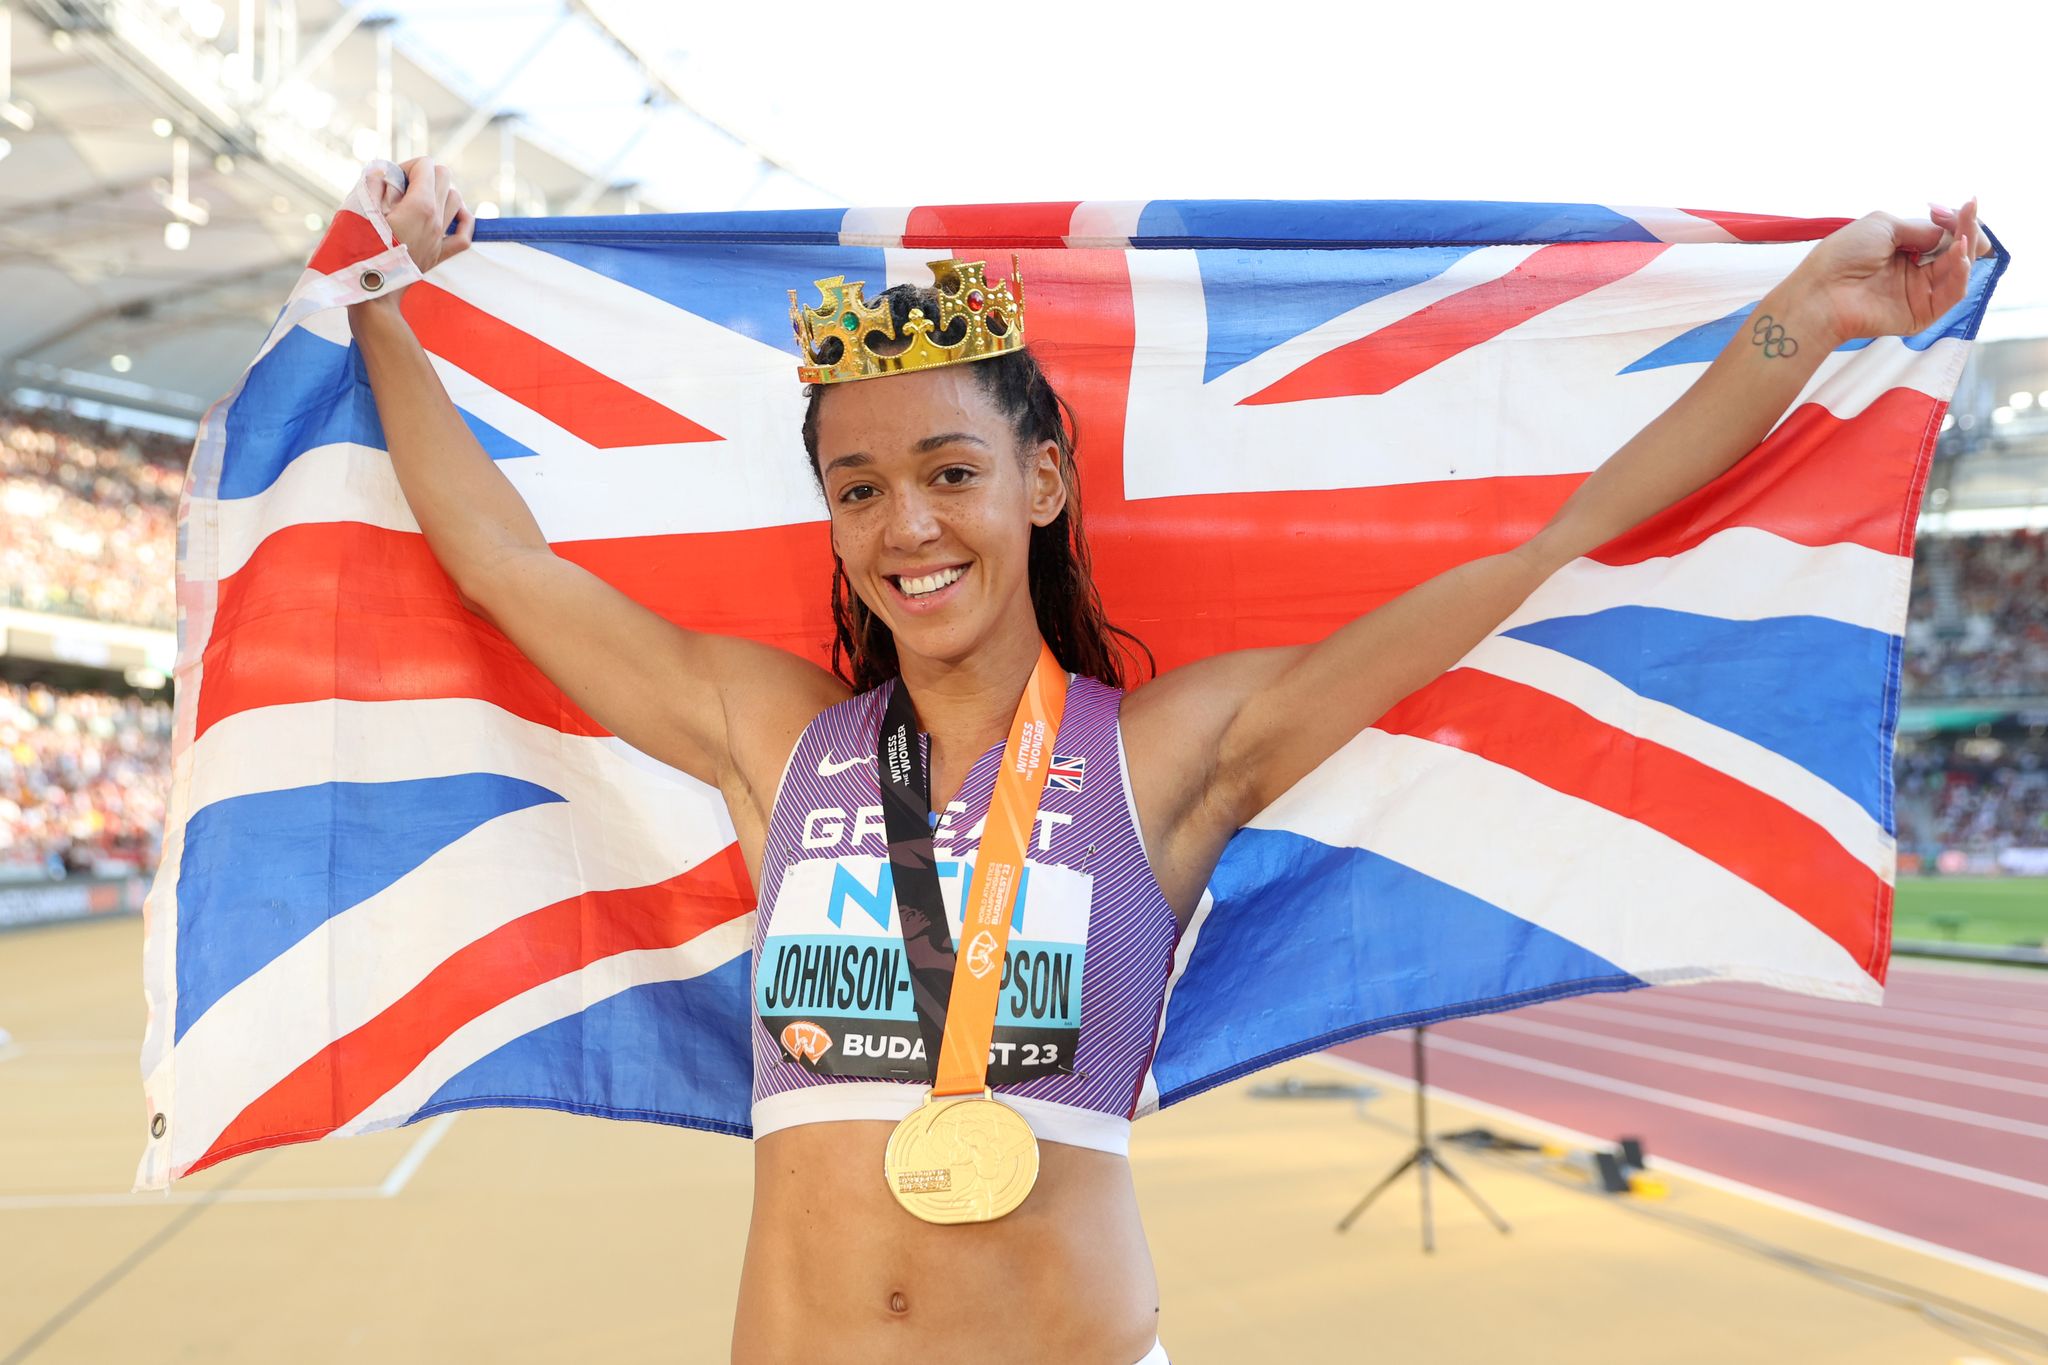 2023 World Athletics Championships: Relive the best moments